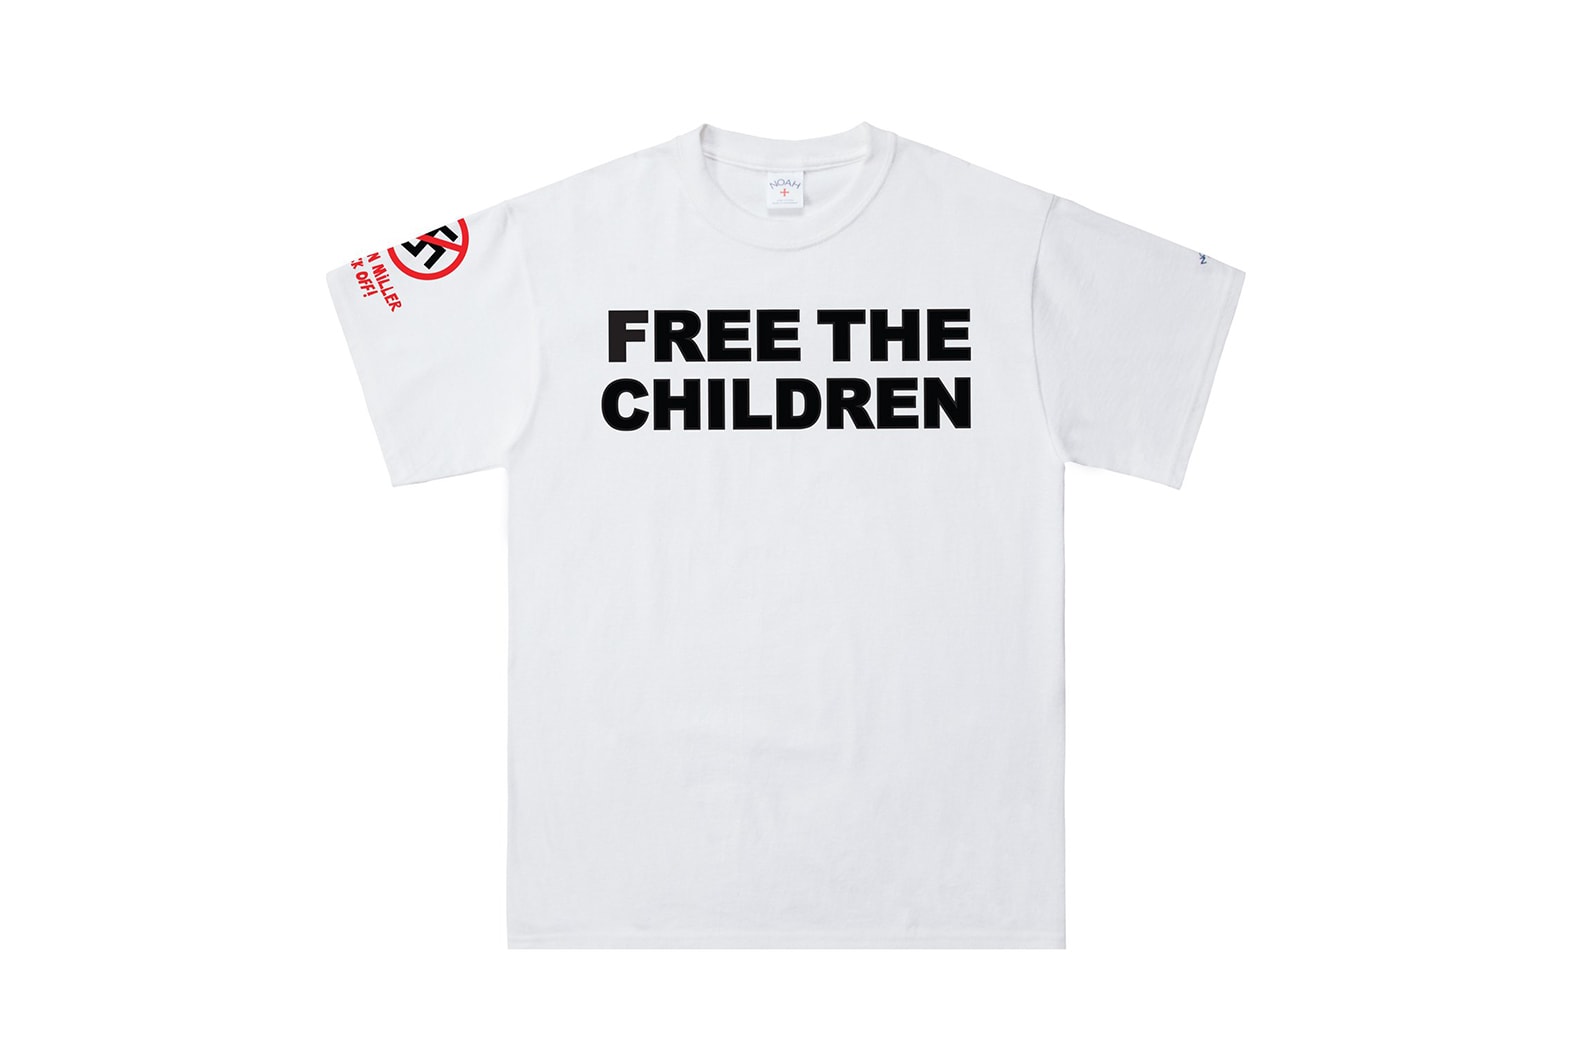 Noah NYC 'Free the Children' Tee Available Cop Purchase Buy Now $48 USD Pre-Order Stephen Miller Donald Trump Border Separations ICE